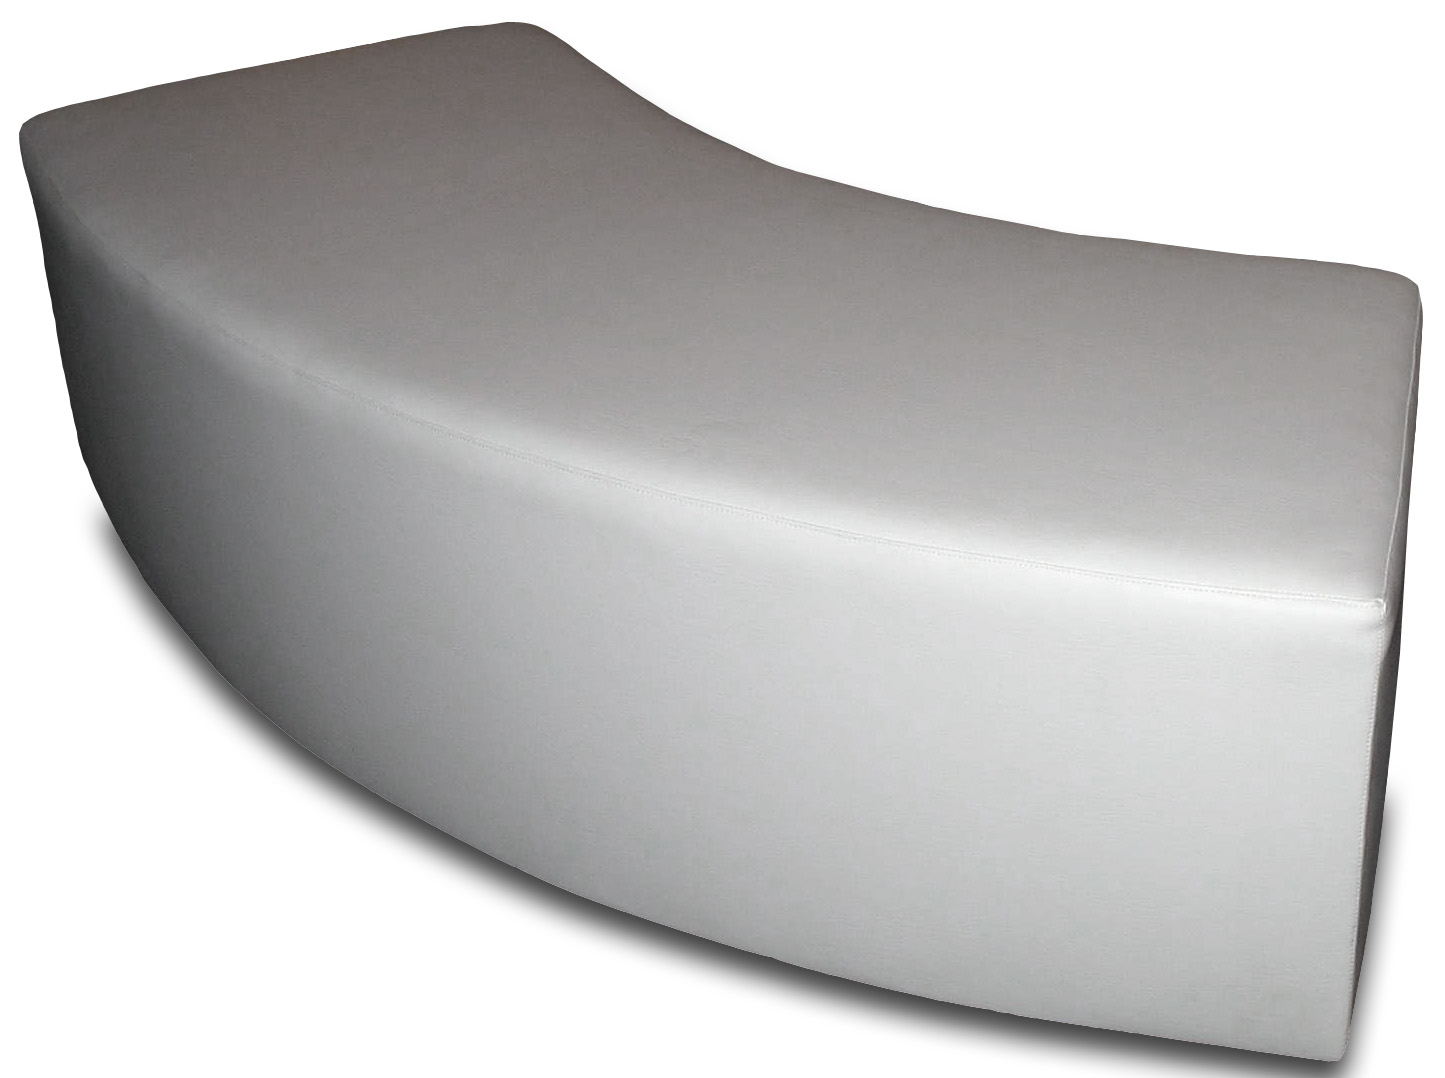 Curve bench